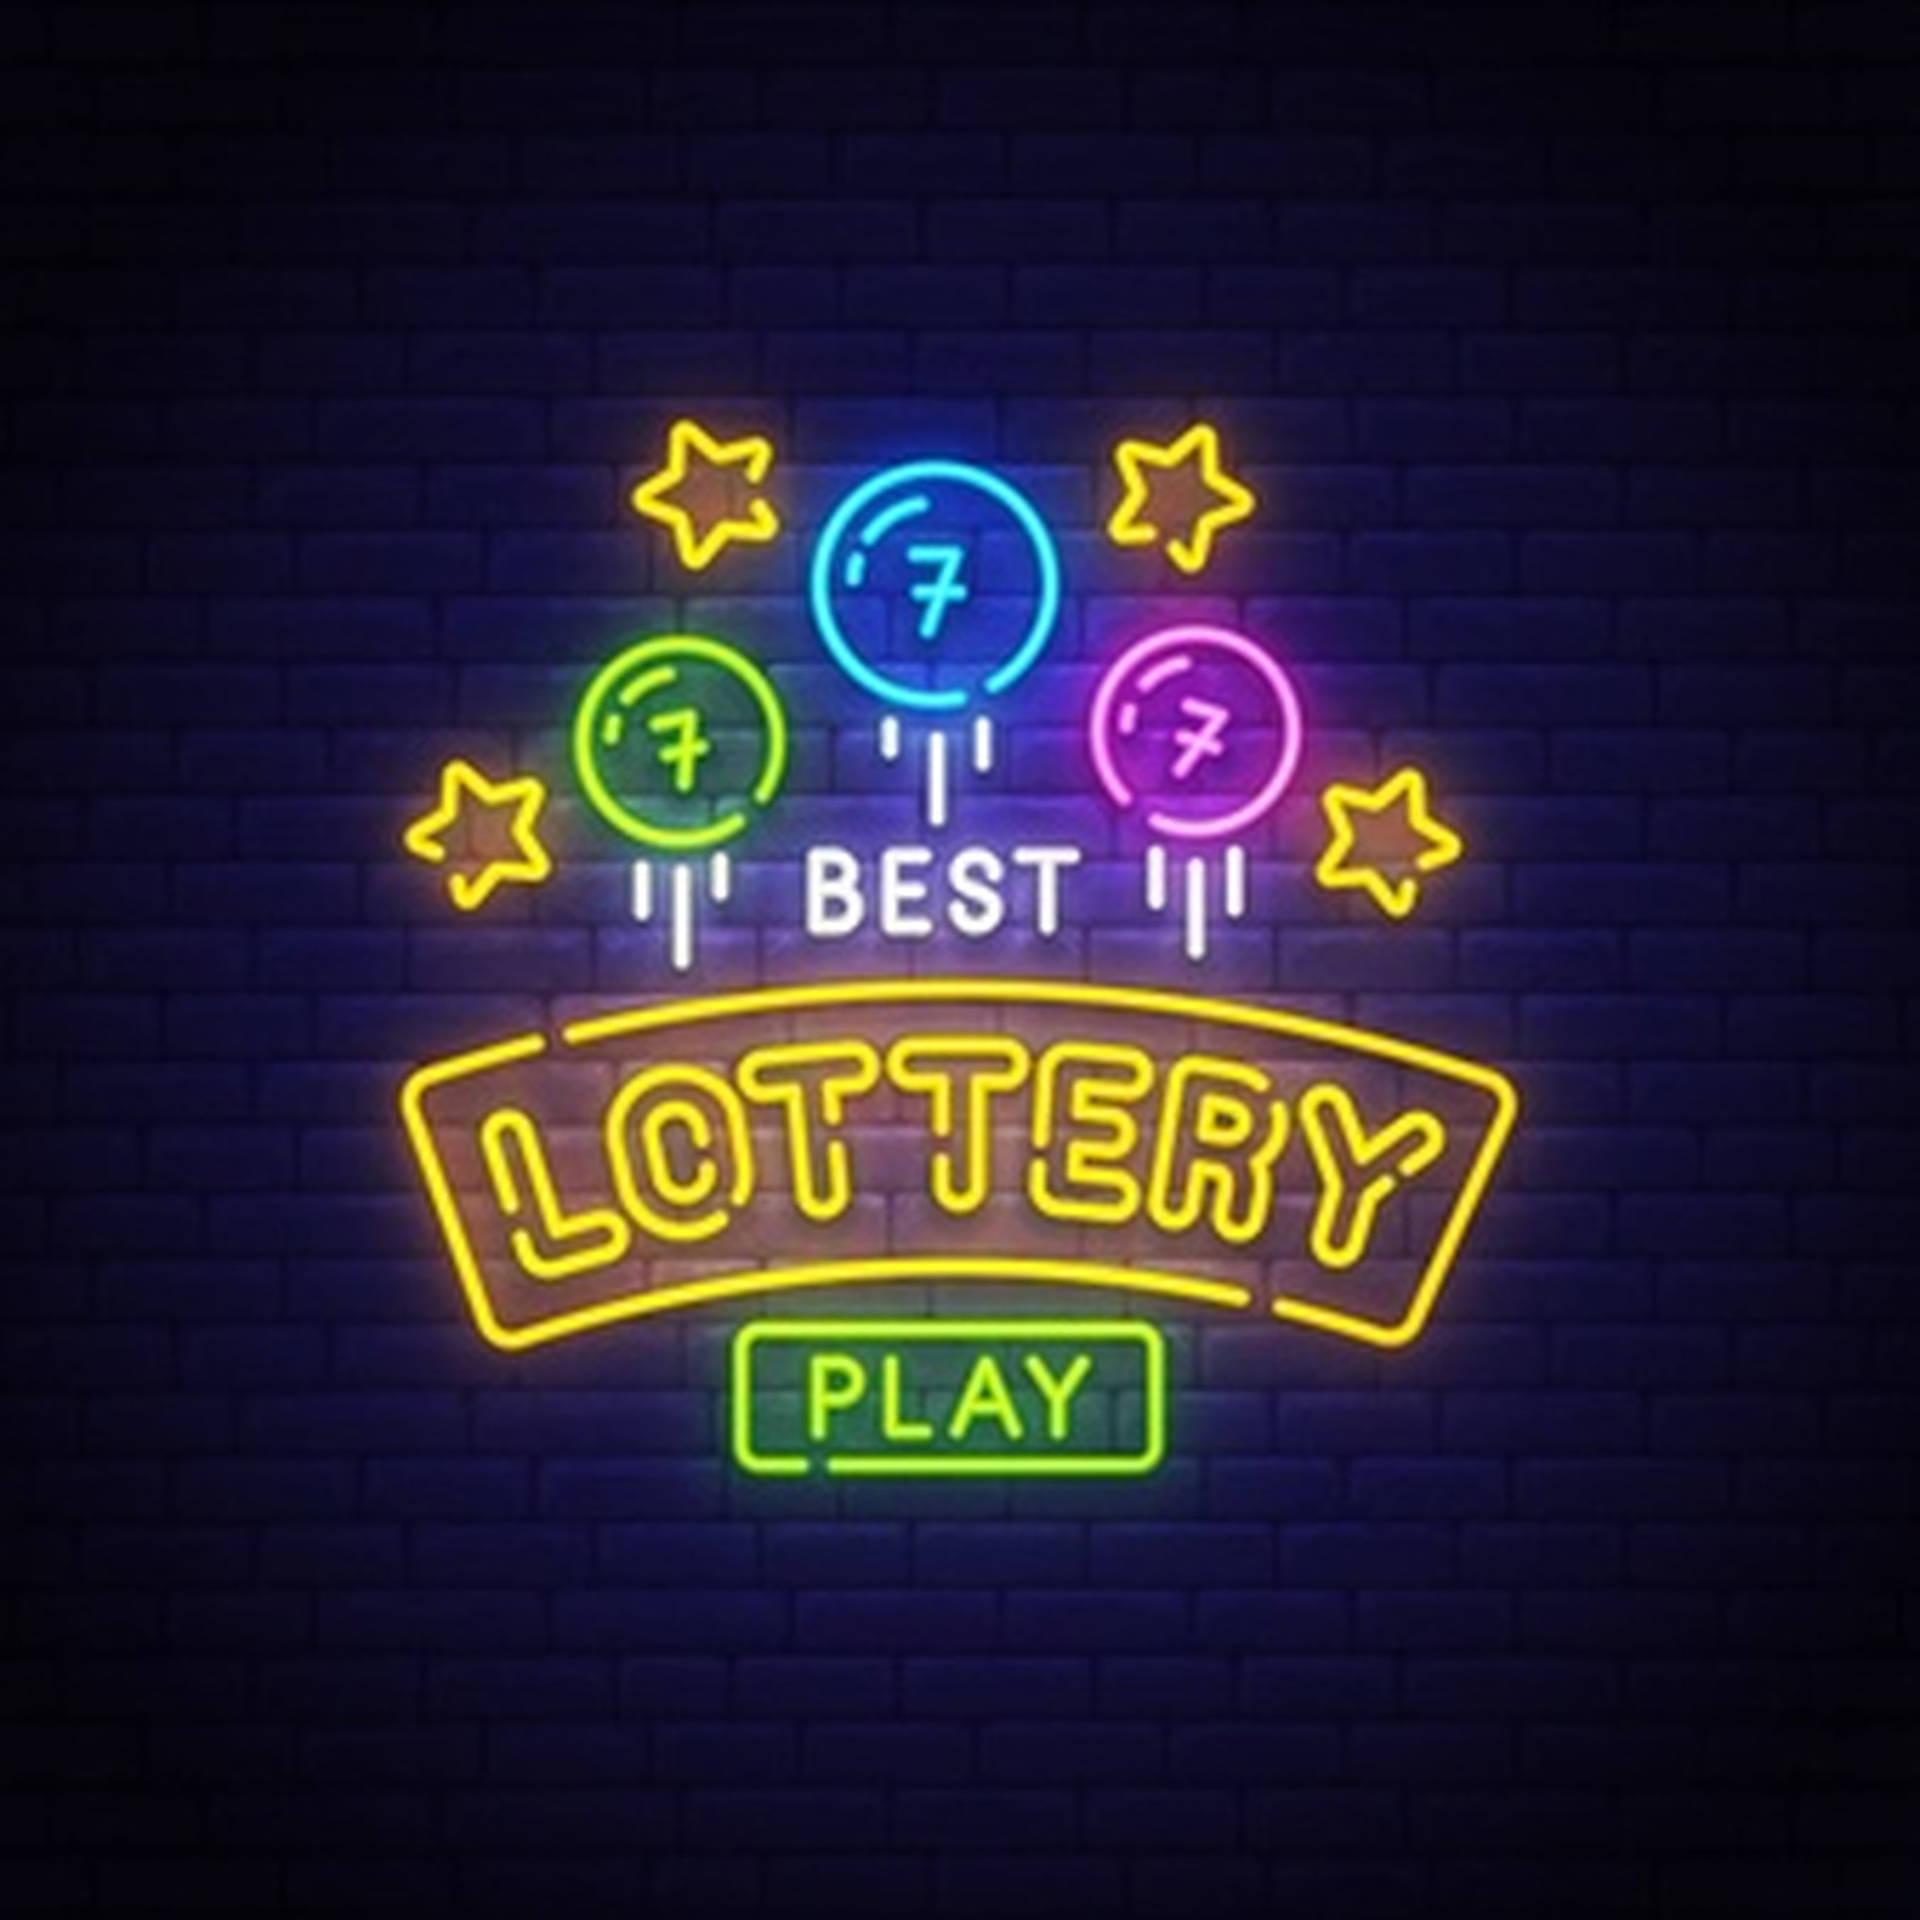 Lottery Play Neon Signage Background